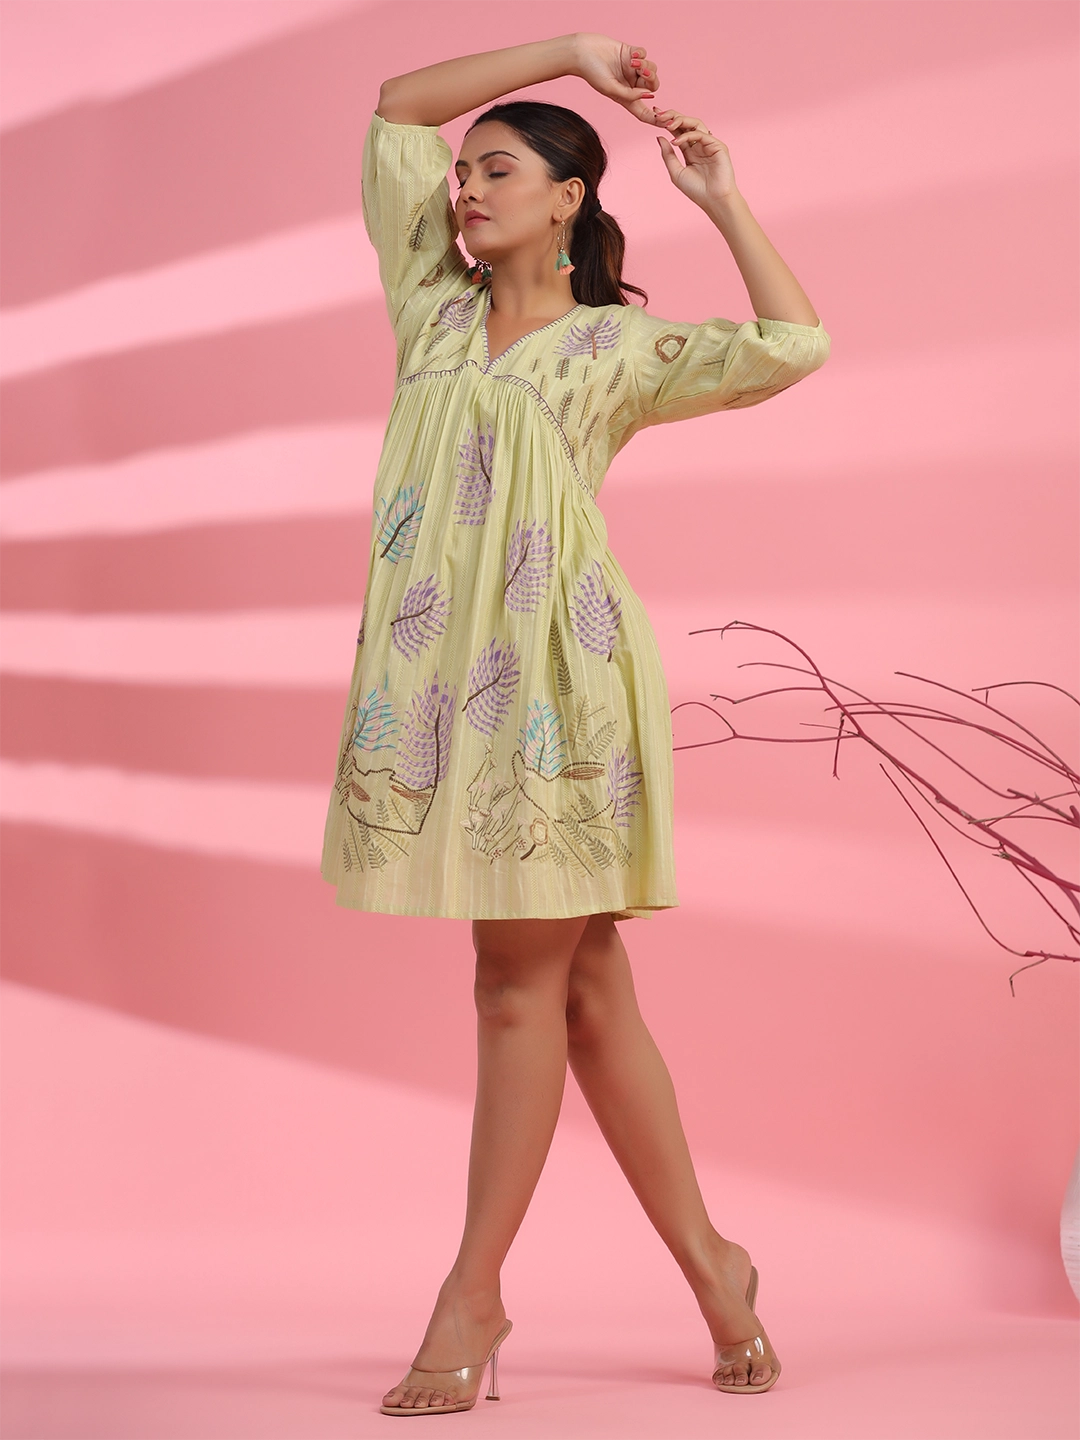 Foliage Whispers: Leaf Embroidery Short Dress